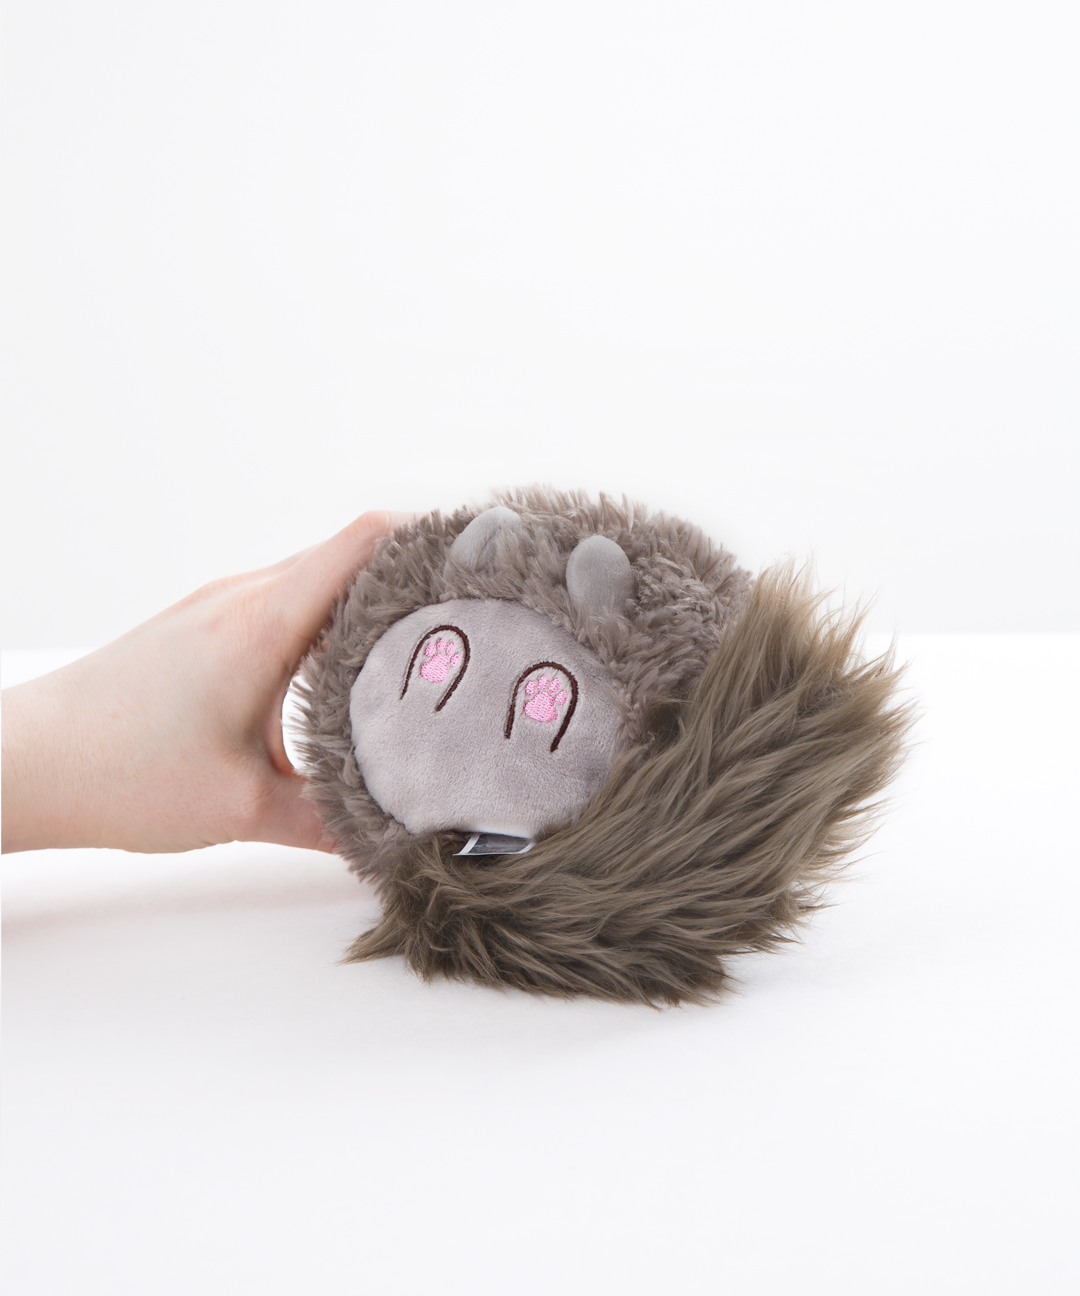 pusheen's little brother